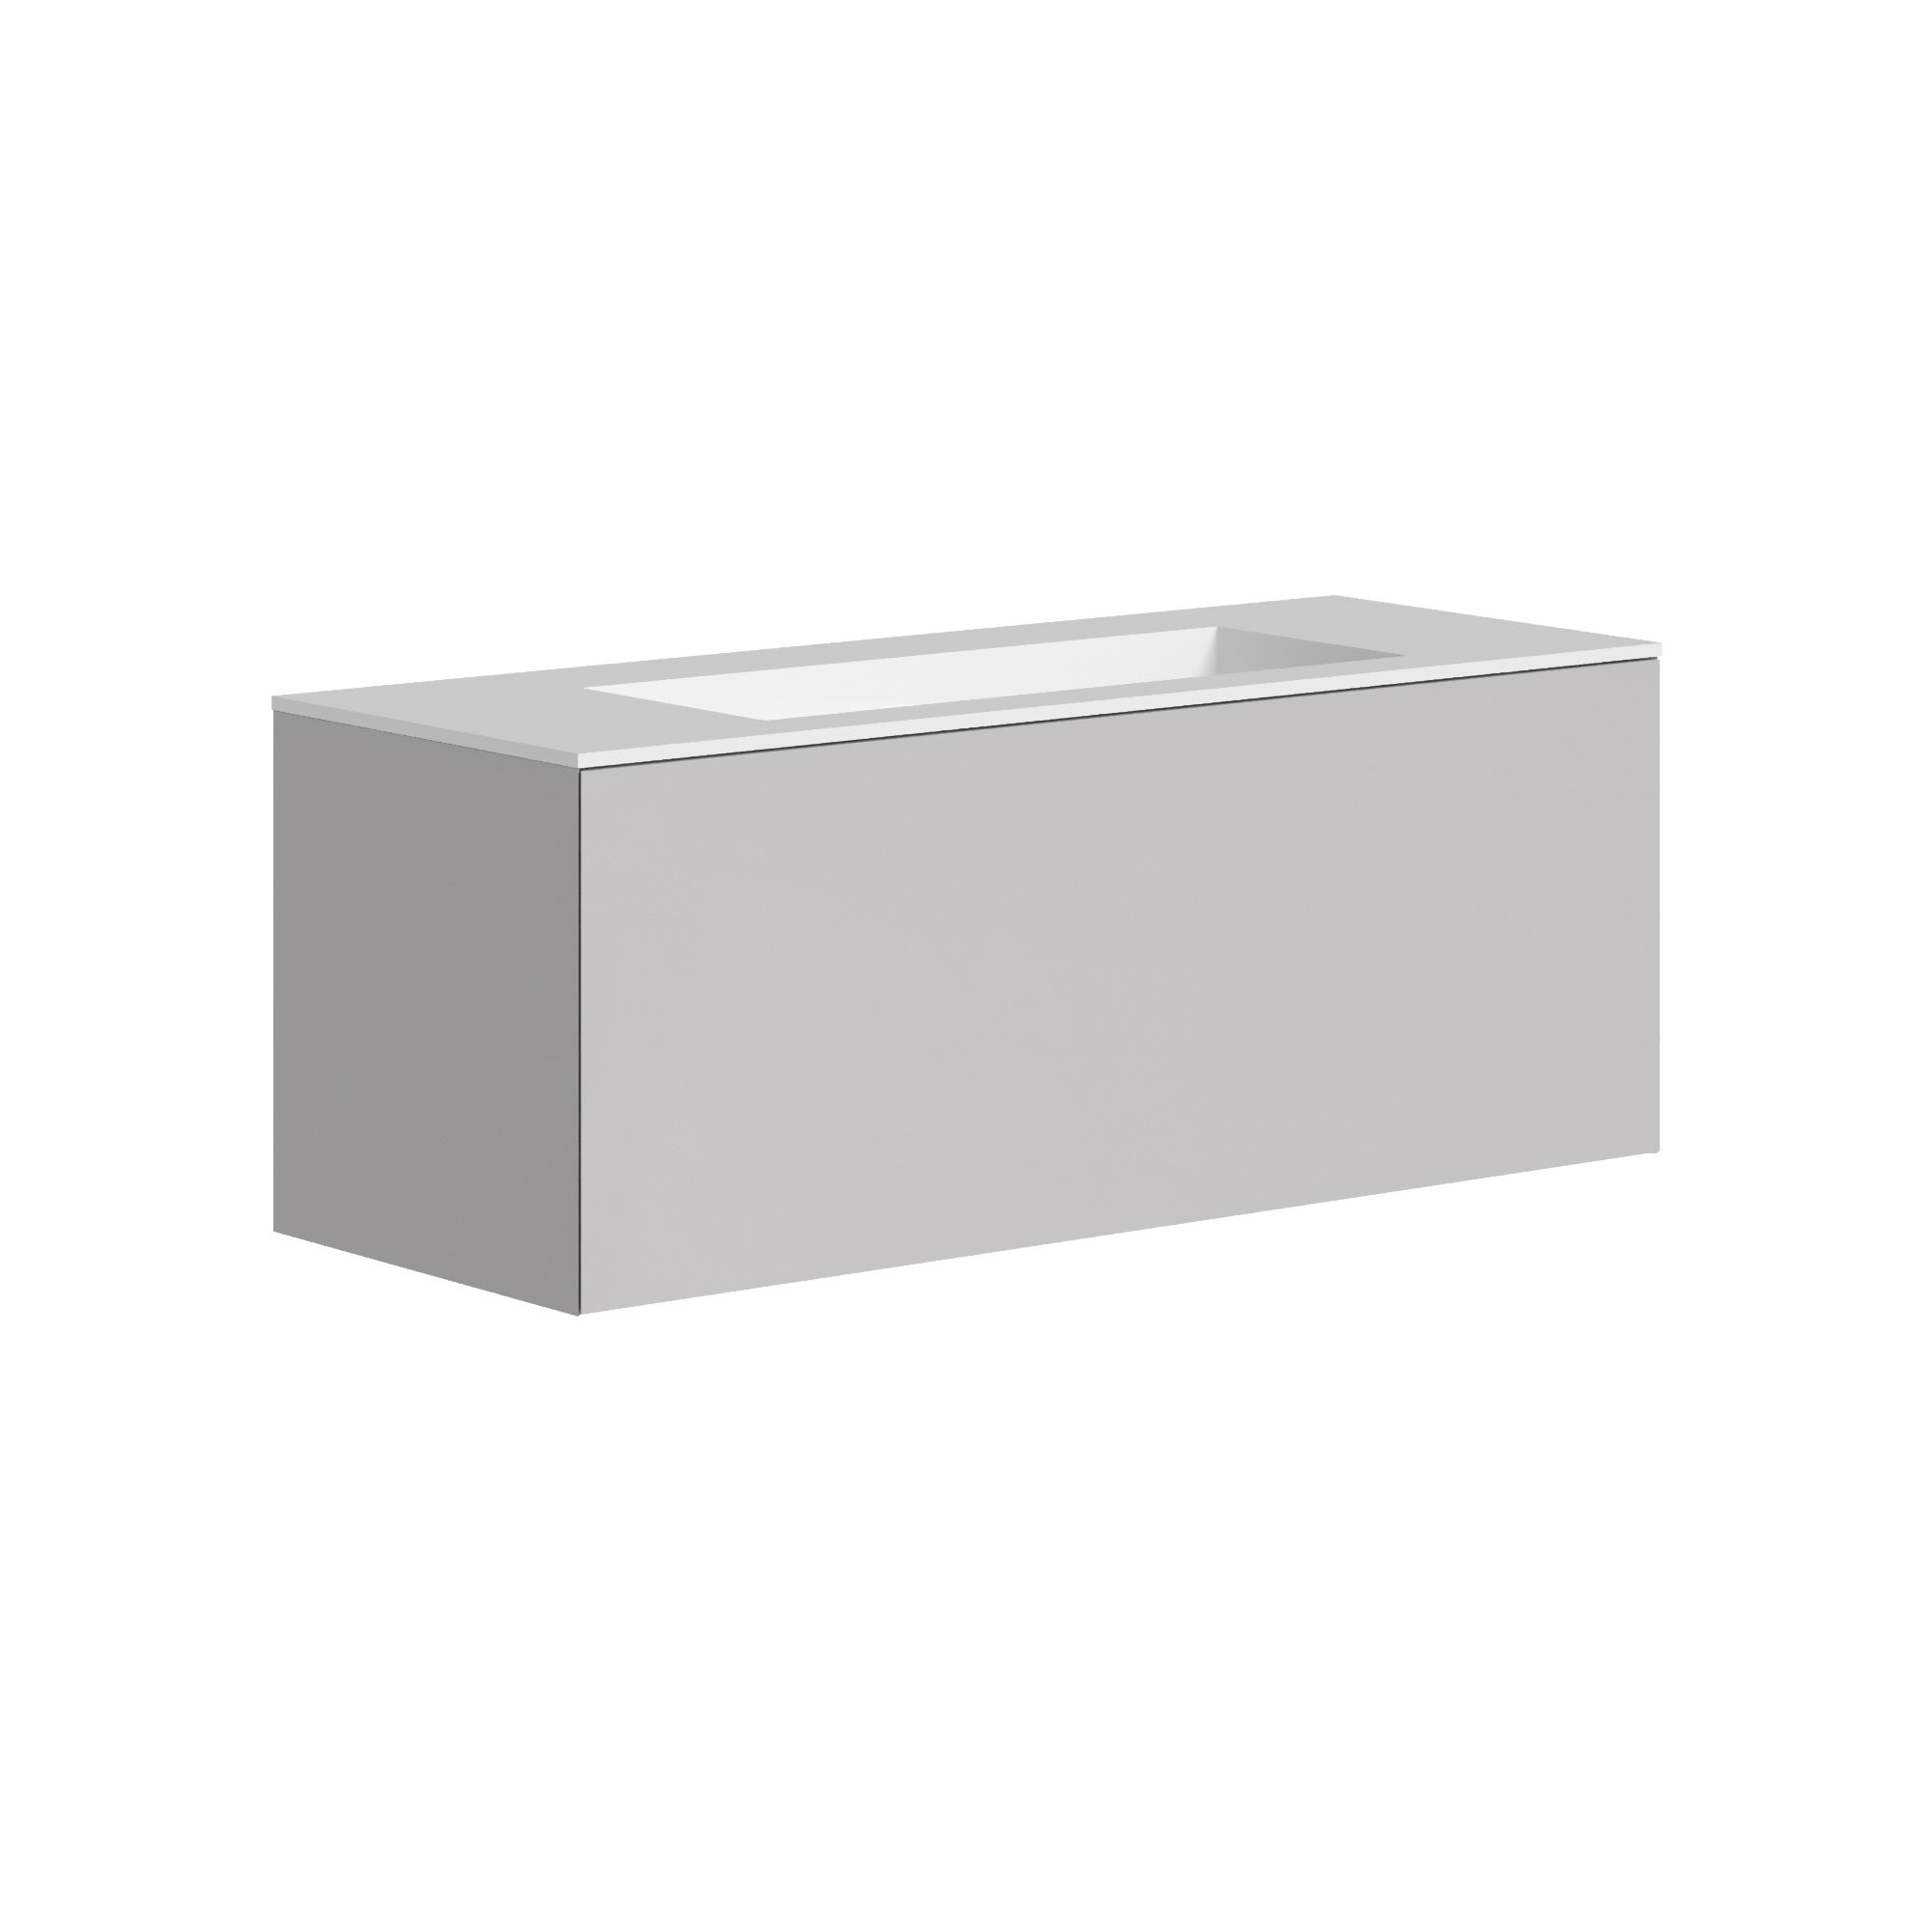 The Ellery Washbasin Push Open Unit 1200x450mm with Integrated Basin